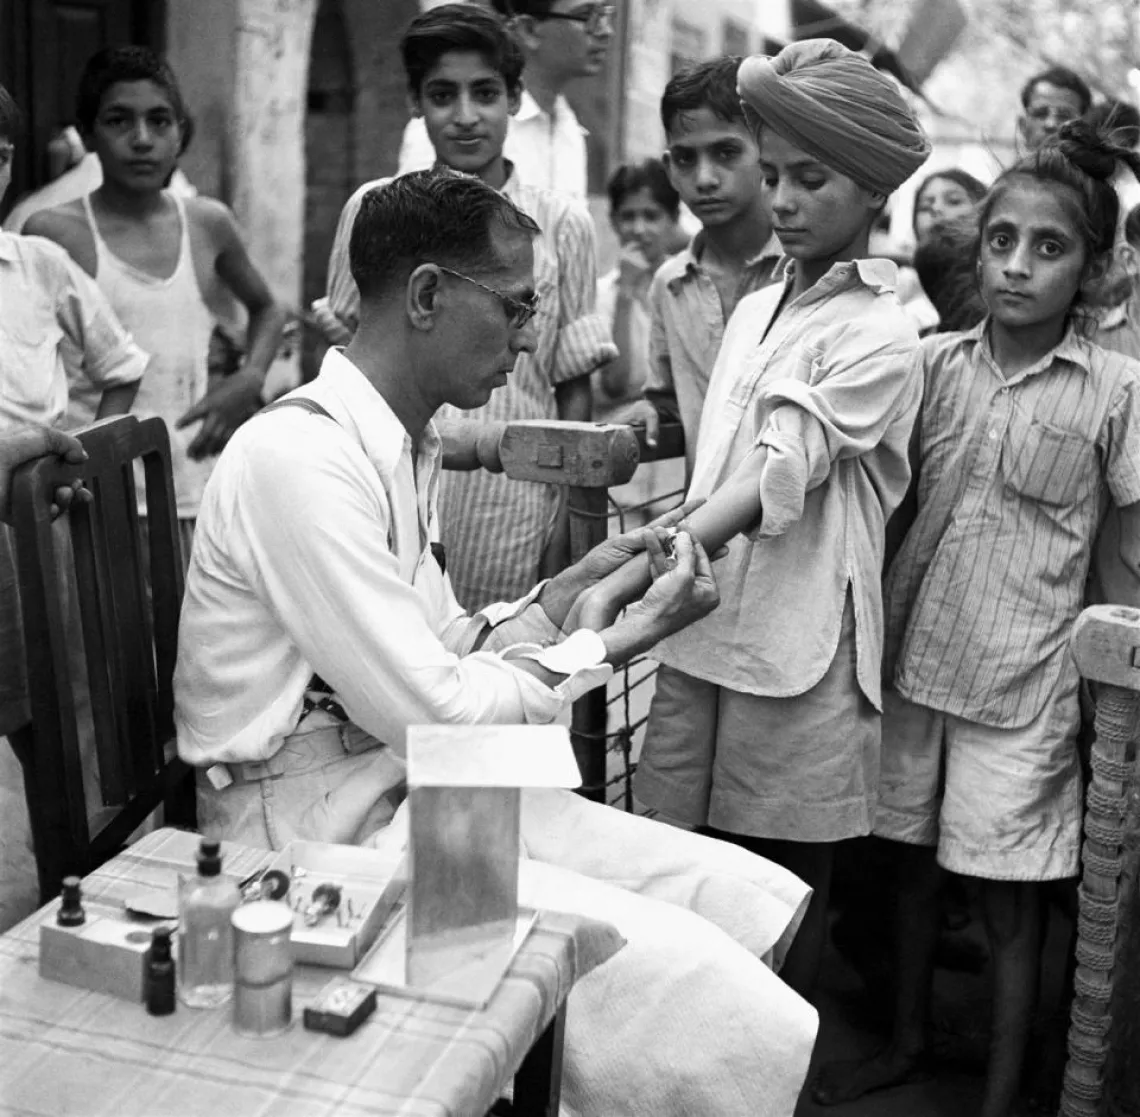 A doctor tests children for tuberculosis in New Delhi, India.